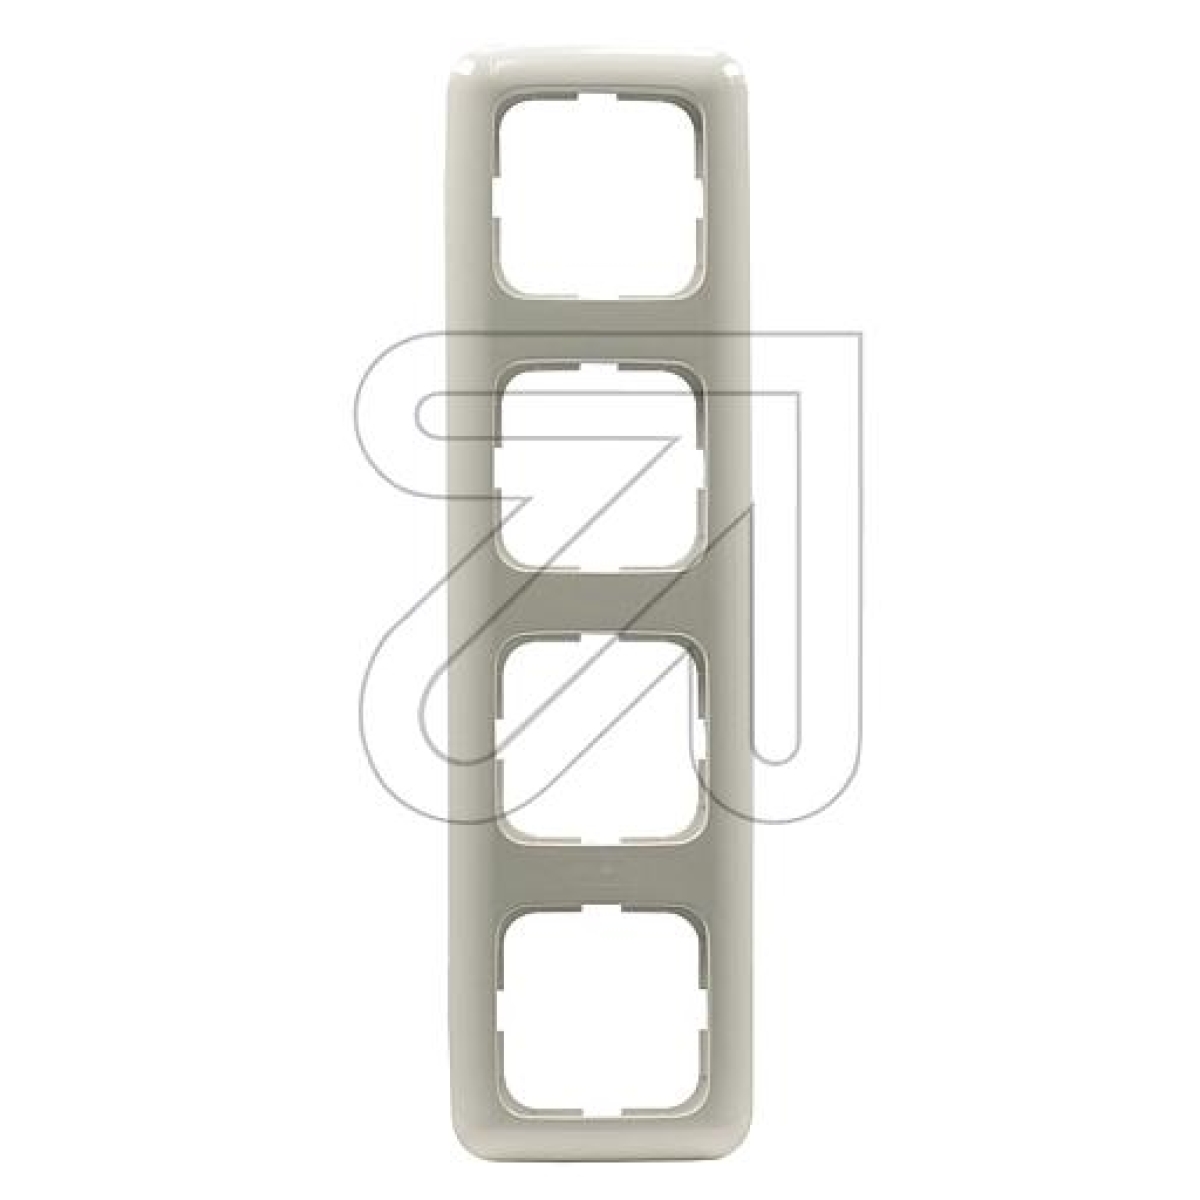 Klein4-way SI cover frame K2514/12Article-No: 089715